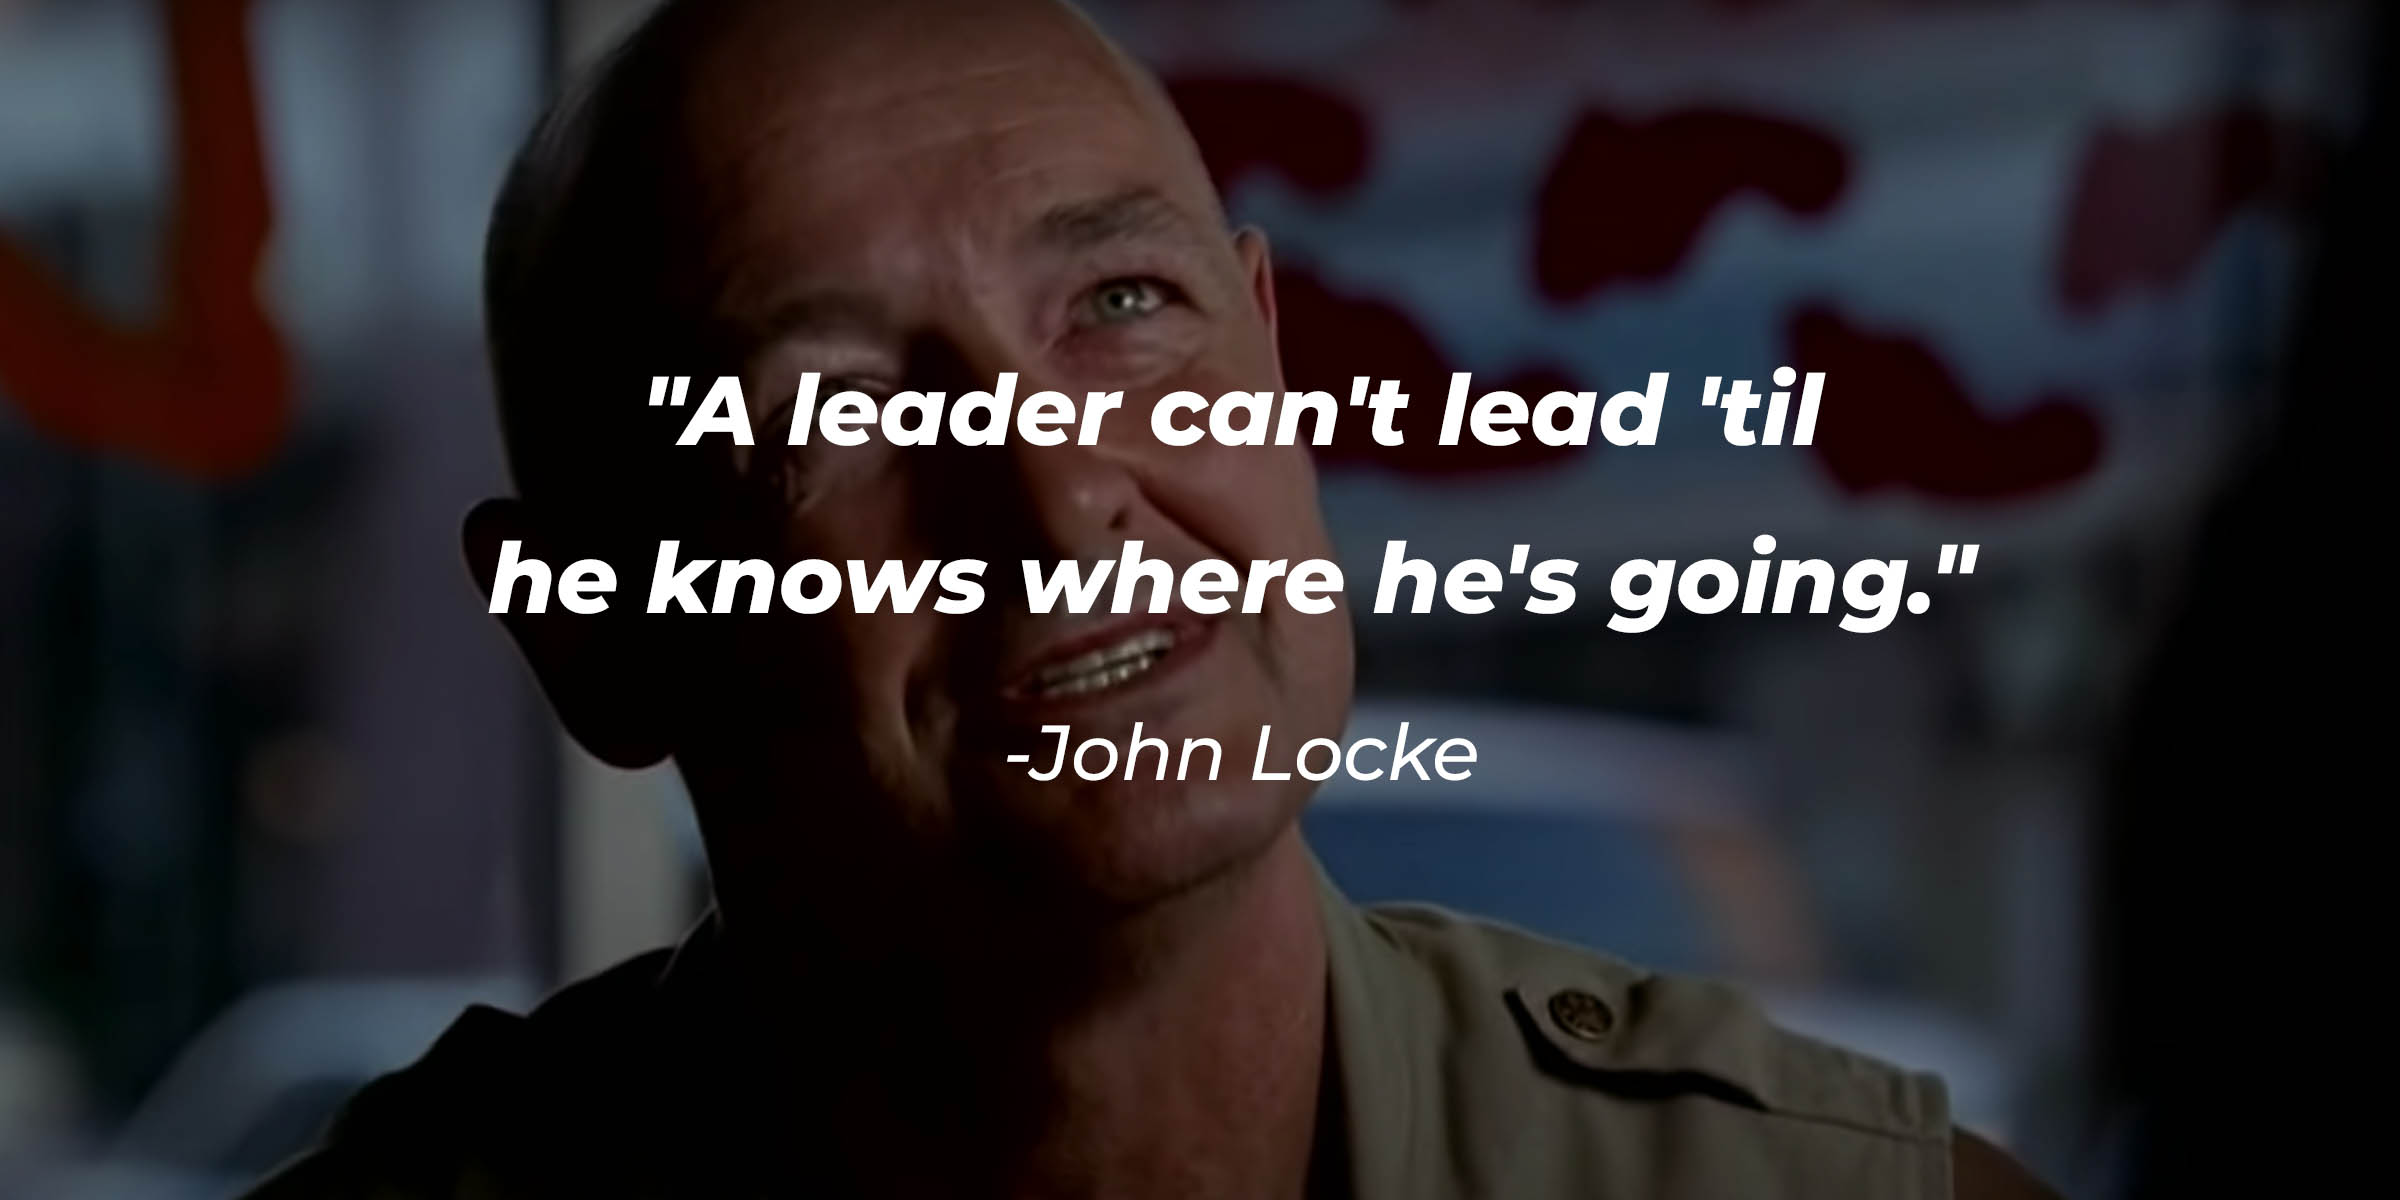 An image of John Locke with his quote, "A leader can't lead 'til he knows where he's going." | Source: youtube.com/Looper